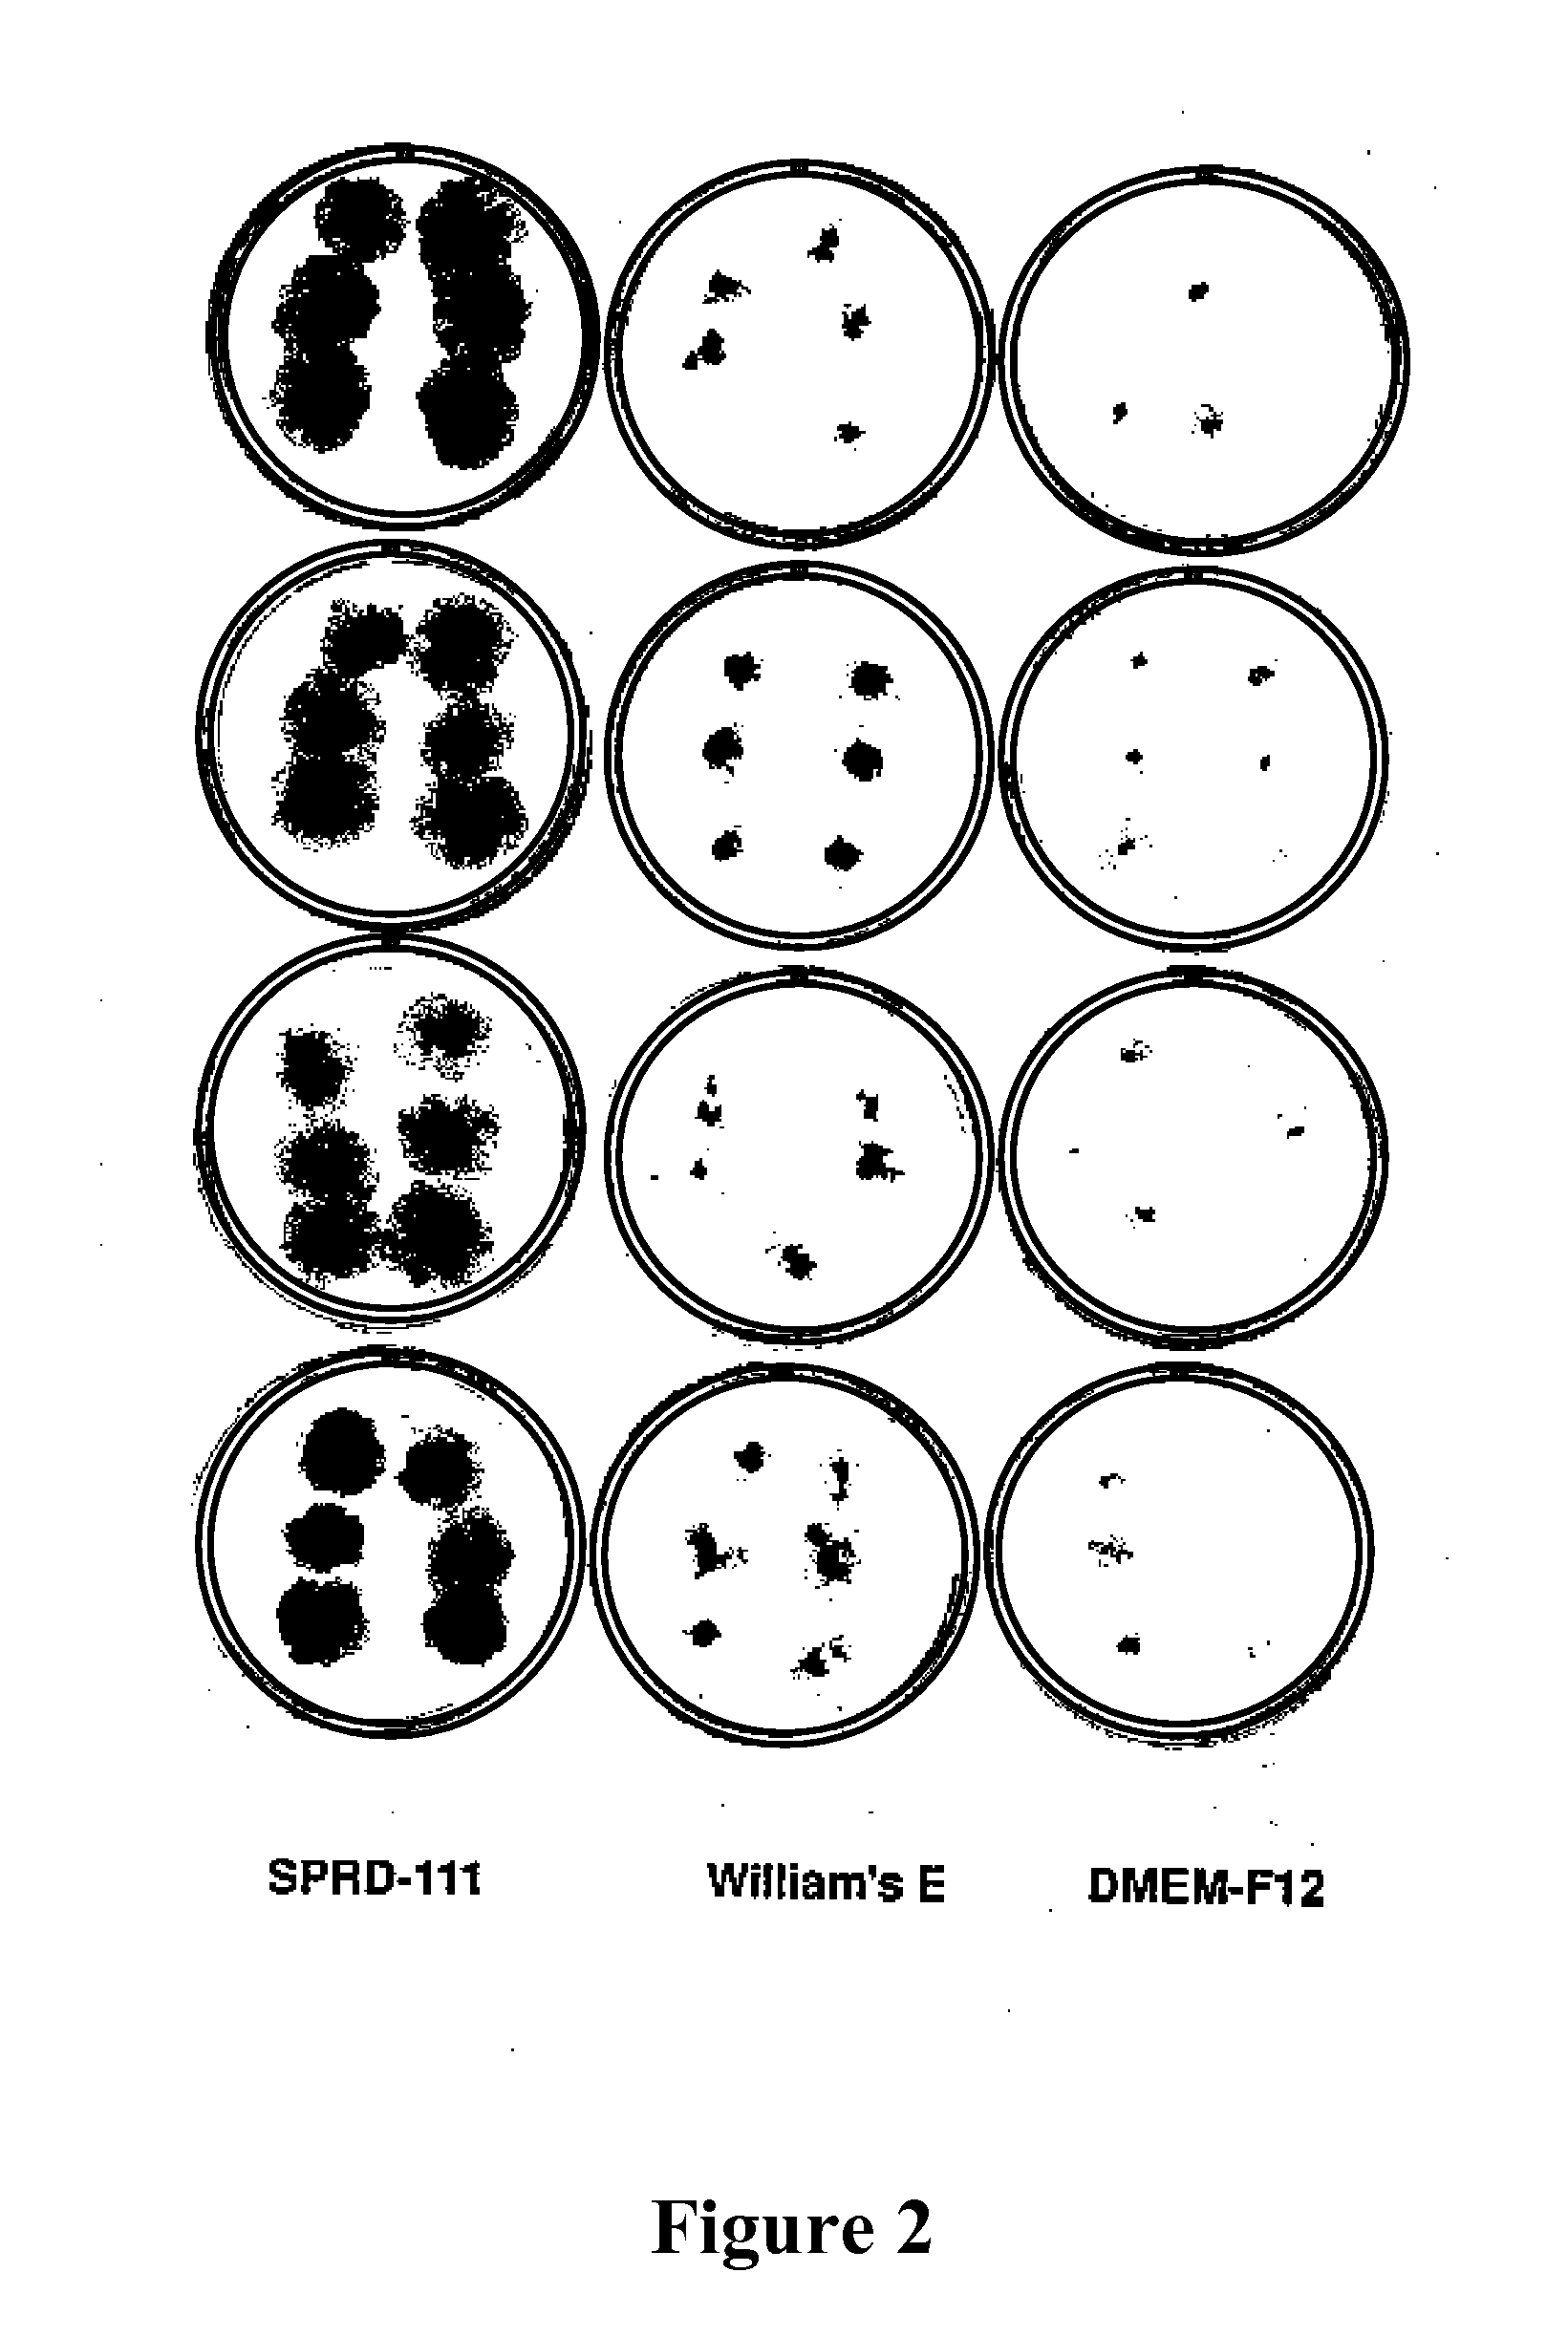 Culture Media For Expansion and Differentiation of Epidermal Cells and Uses Thereof For In Vitro Growth of Hair Follicles